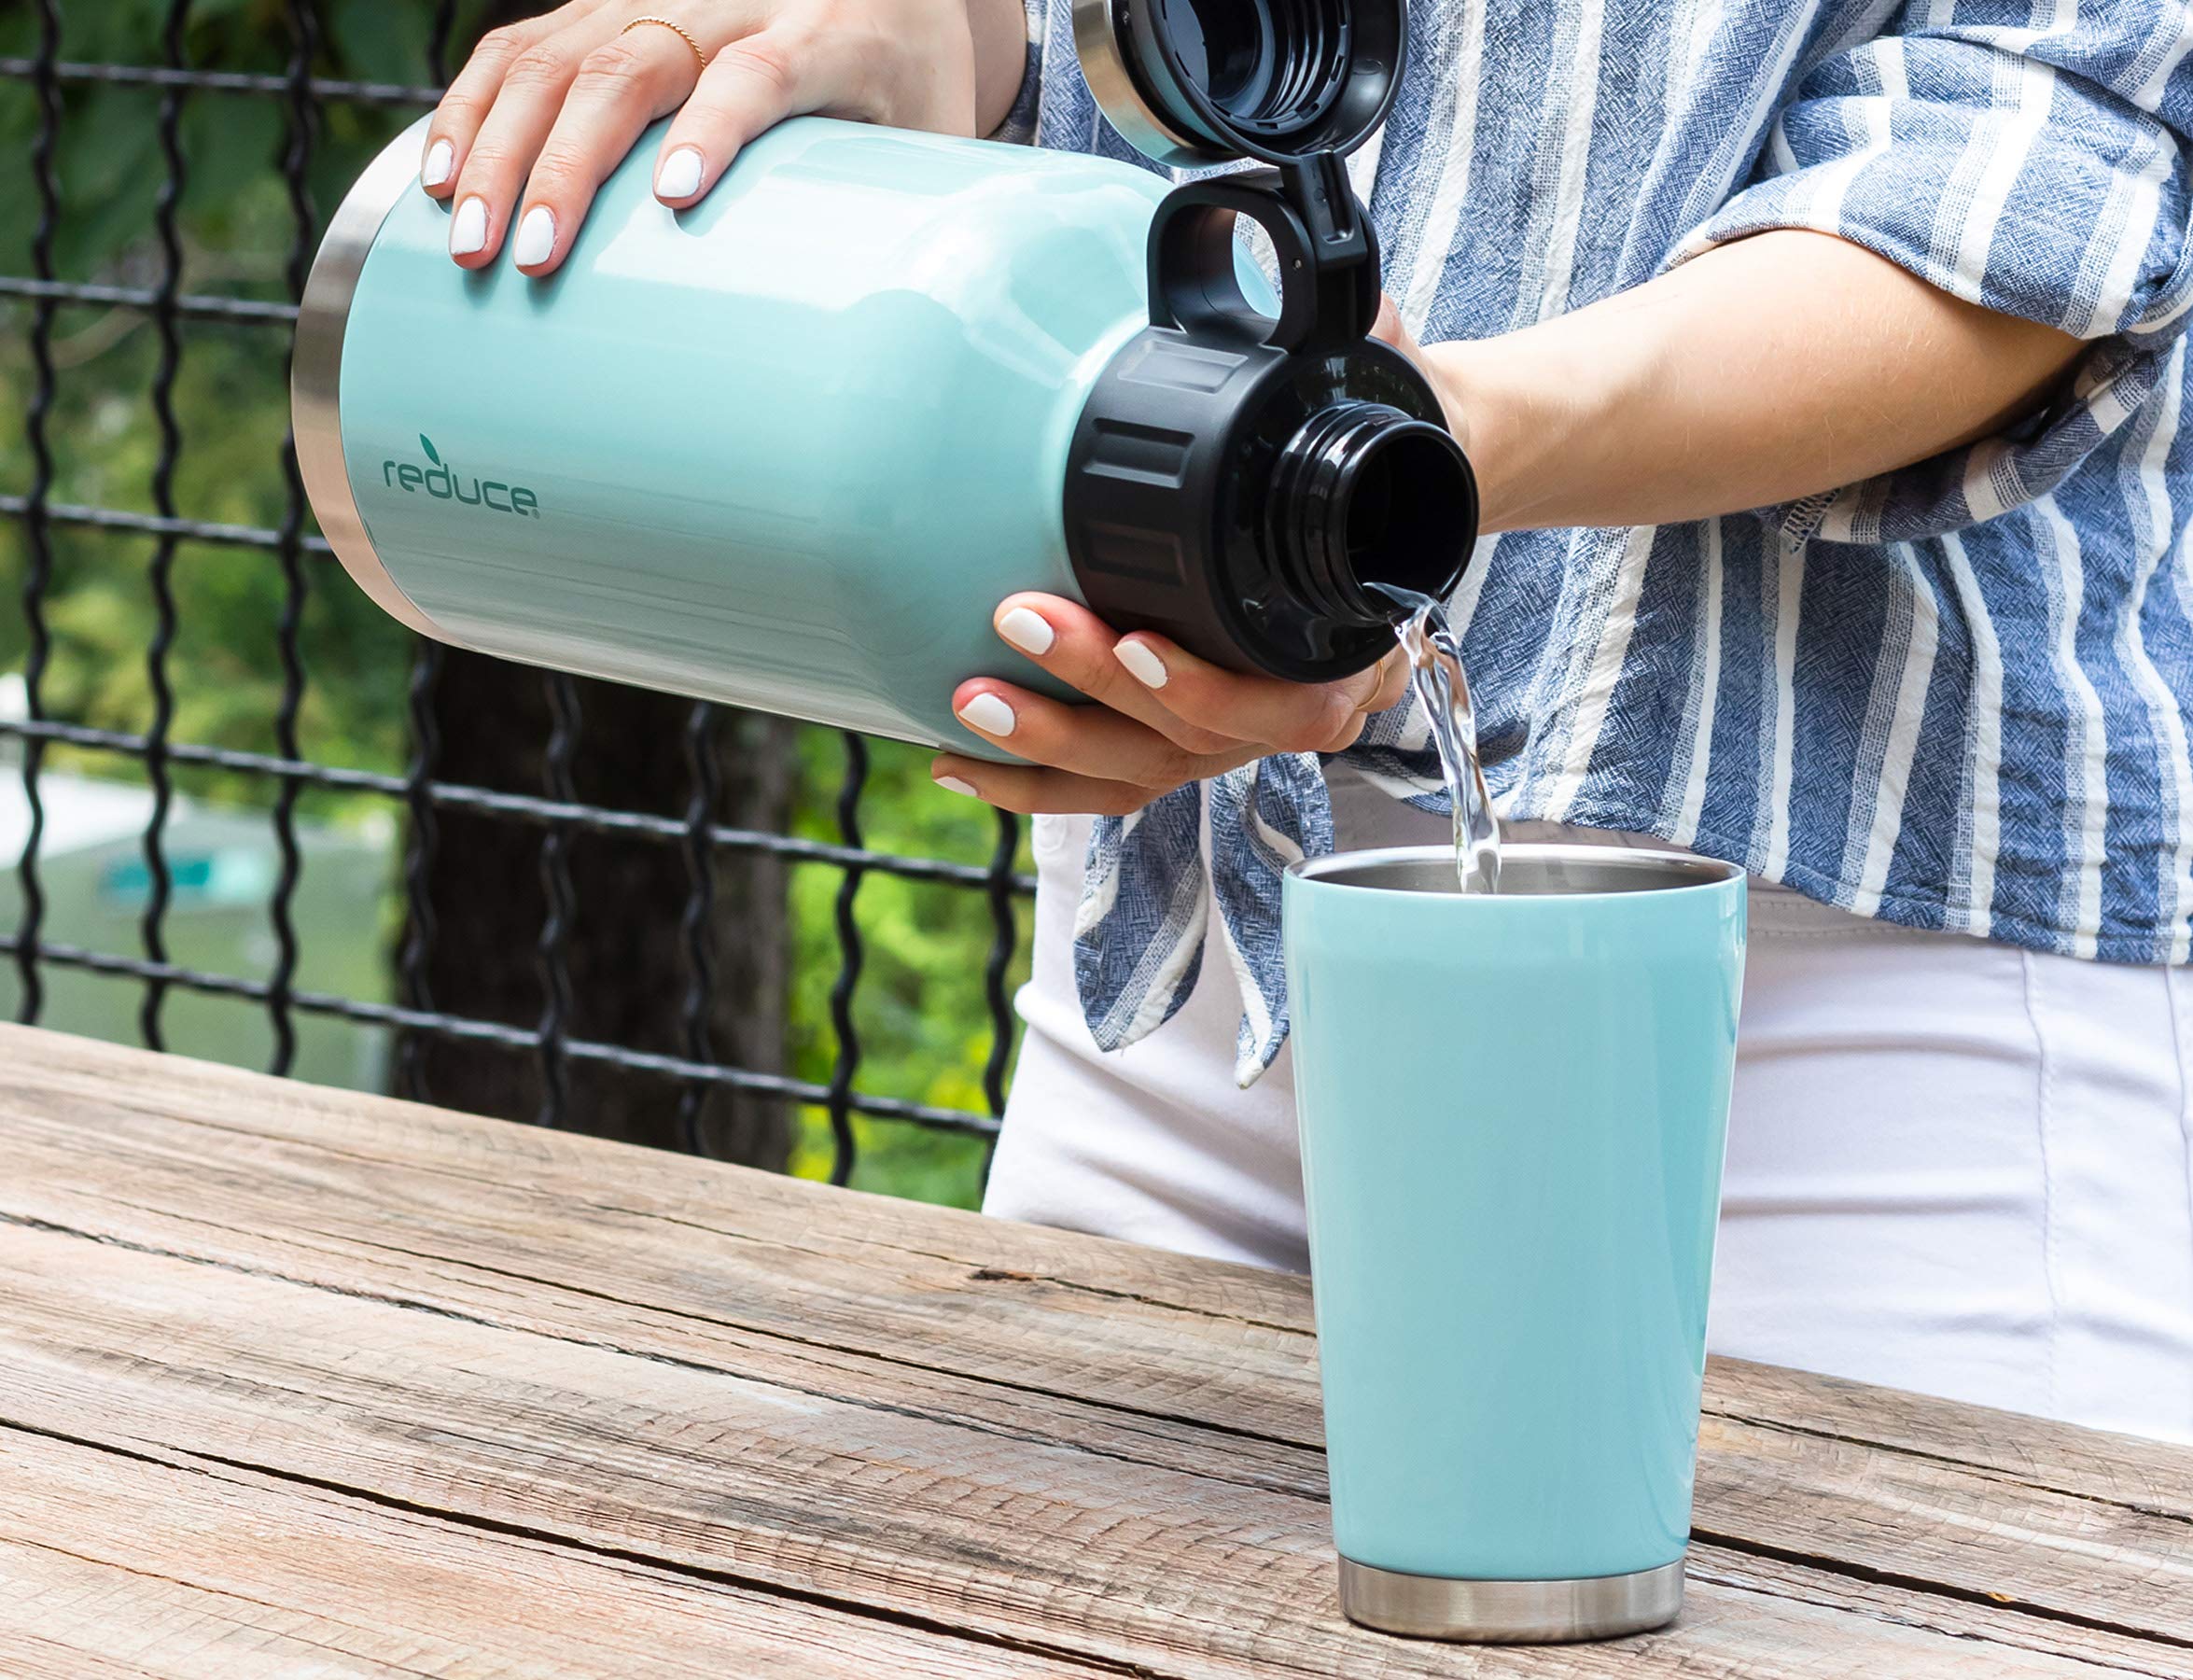 Reduce Insulated Growler, 64 oz - Up to 60 Hours Cold - Vacuum Insulated, Large Capacity for Any Adventure - Dual Opening Leak-Proof Lid, Doubles as a Cup - Eucalyptus, Opaque Gloss